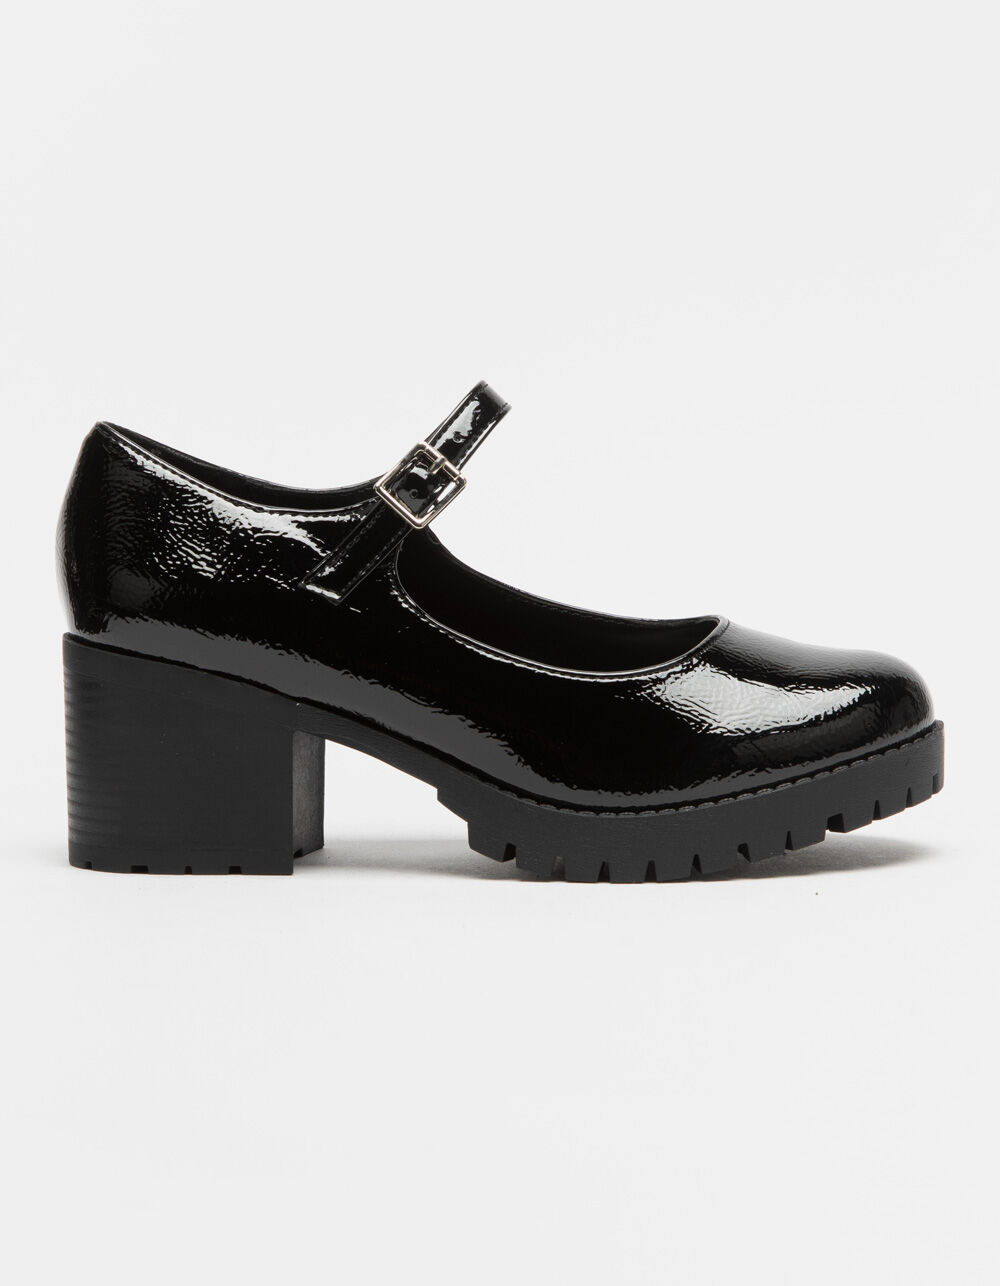 SODA Patent Mary Jane Womens Shoes - BLACK | Tillys